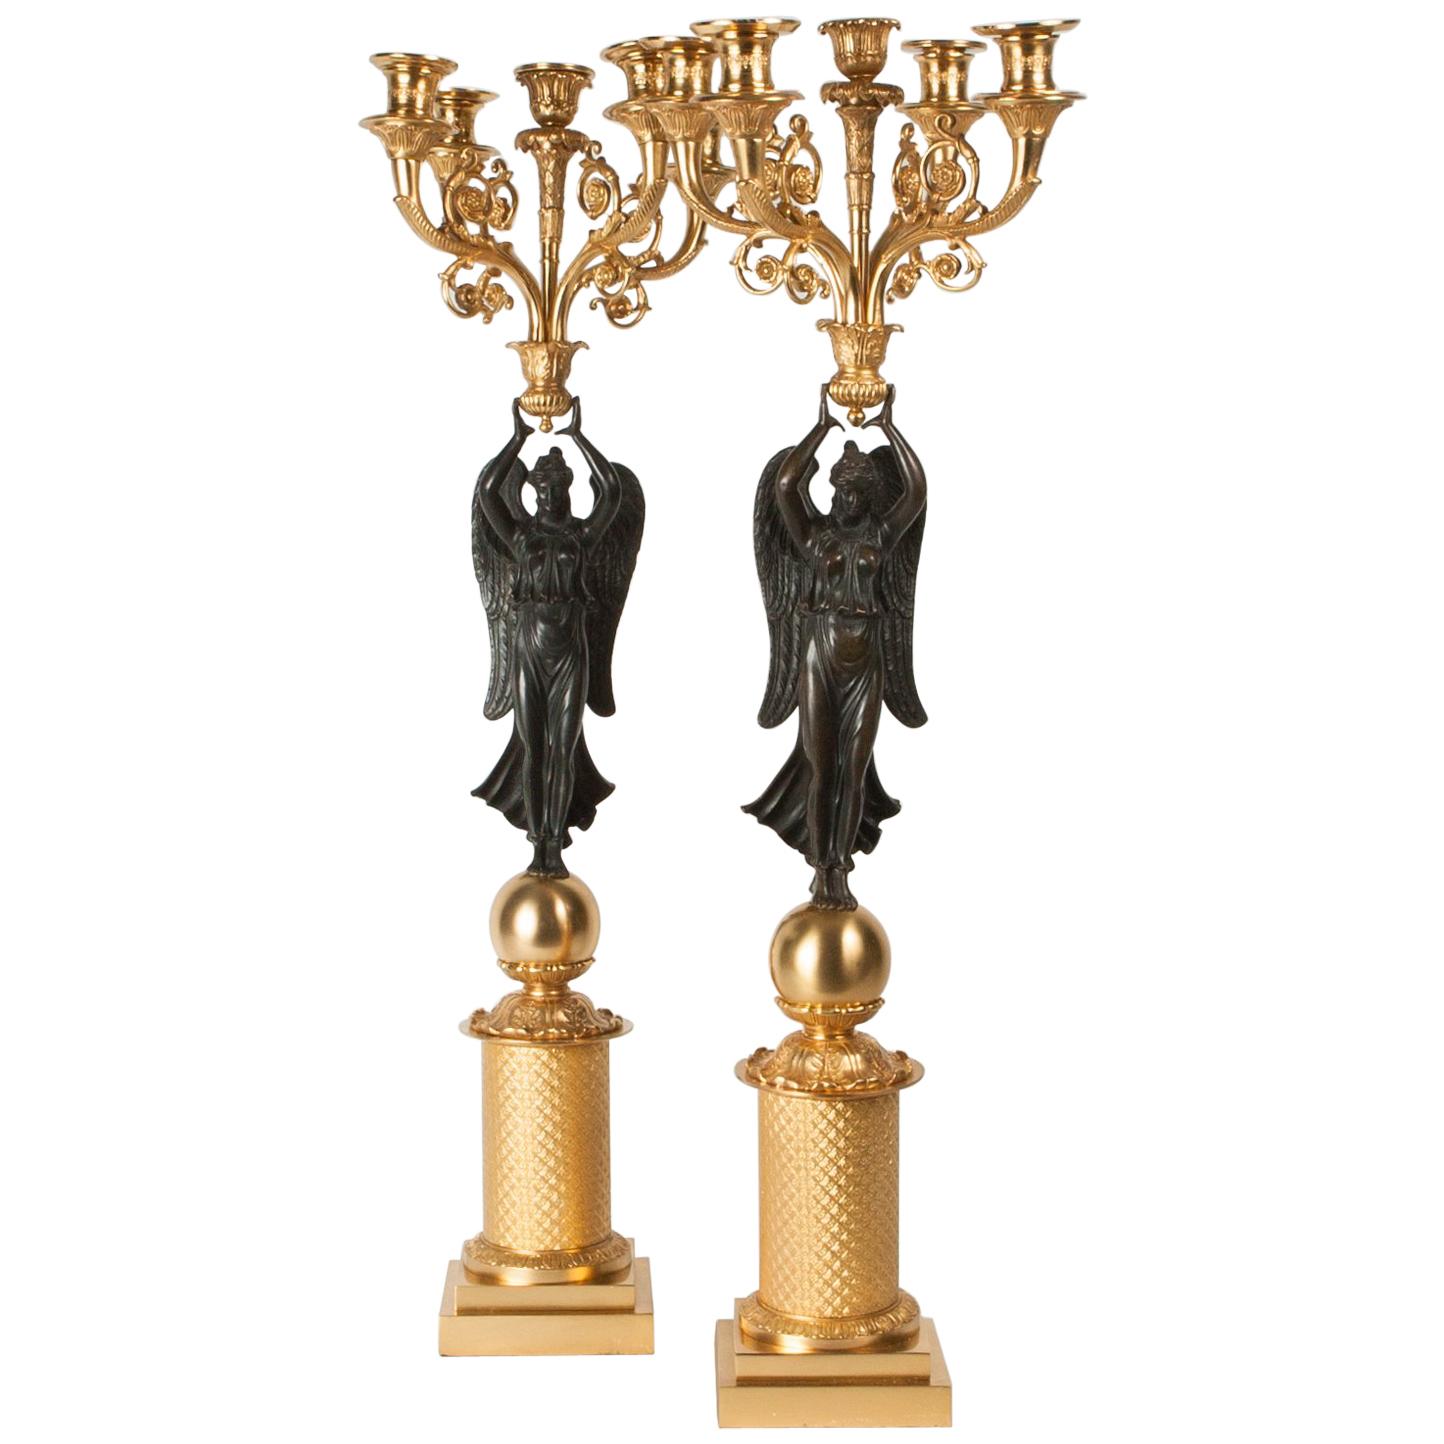 Pair of 19th-Century Empire Style Bronze and Gilt Candelabras